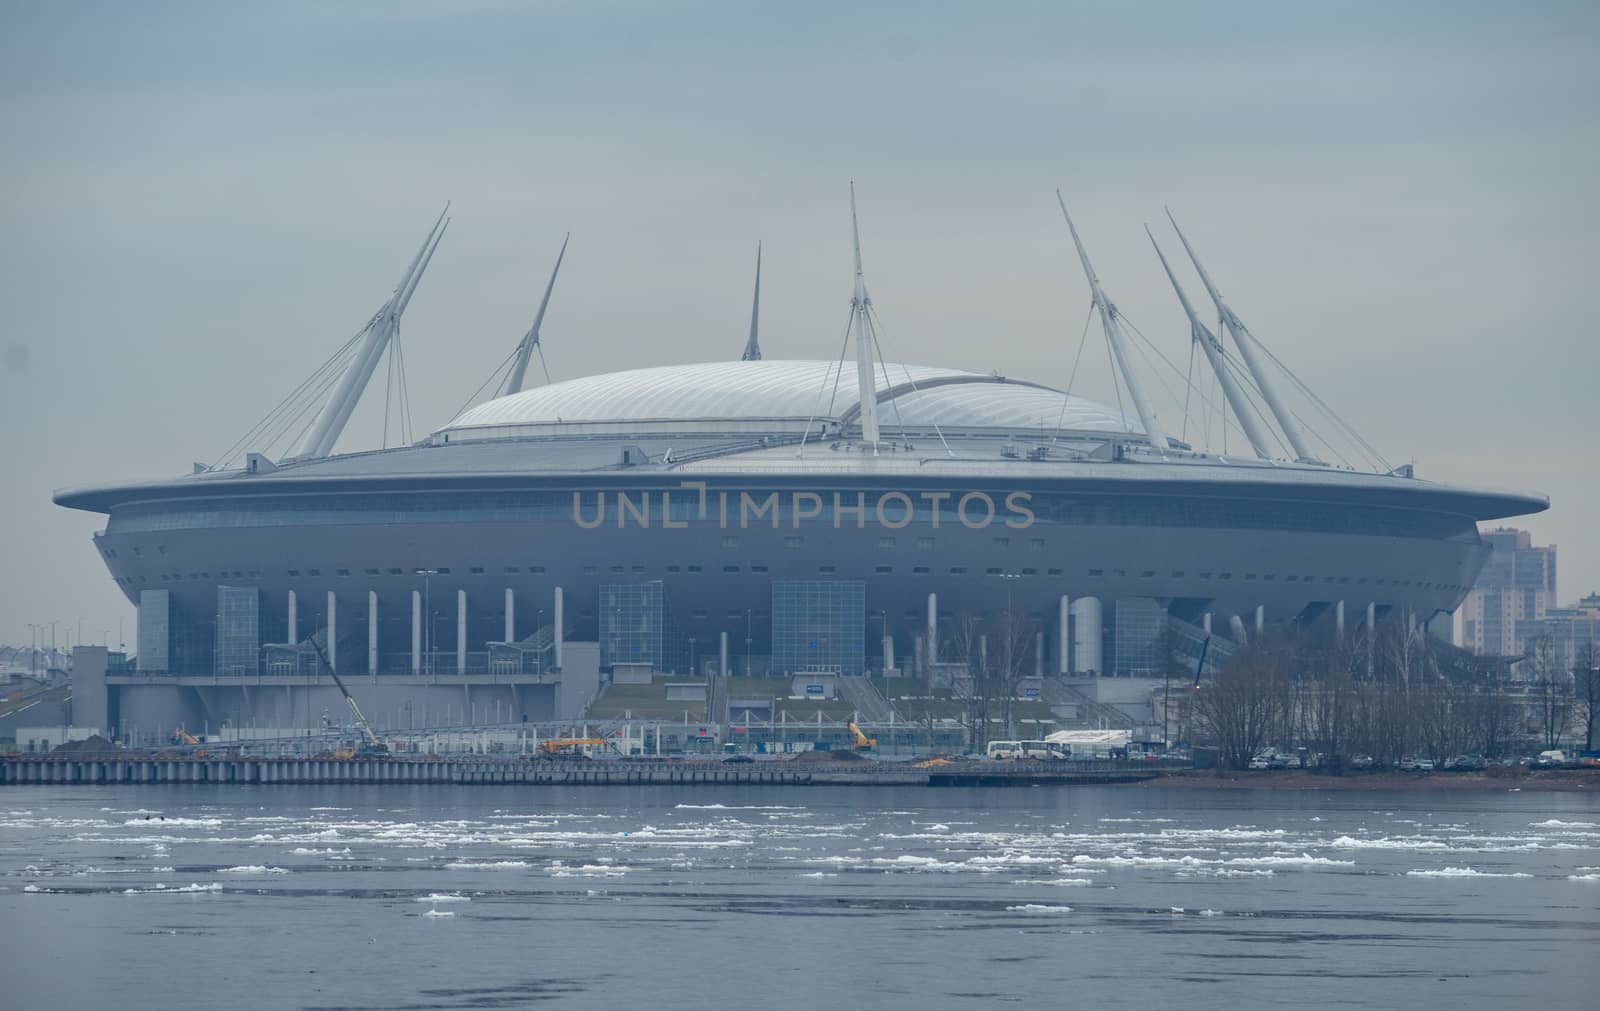 April 17, 2018. St. Petersburg, Russia. Stadium St. Petersburg arena (Gazprom arena), which will host the matches of the European football Championship in 2020 and the final of the Champions League in 2021